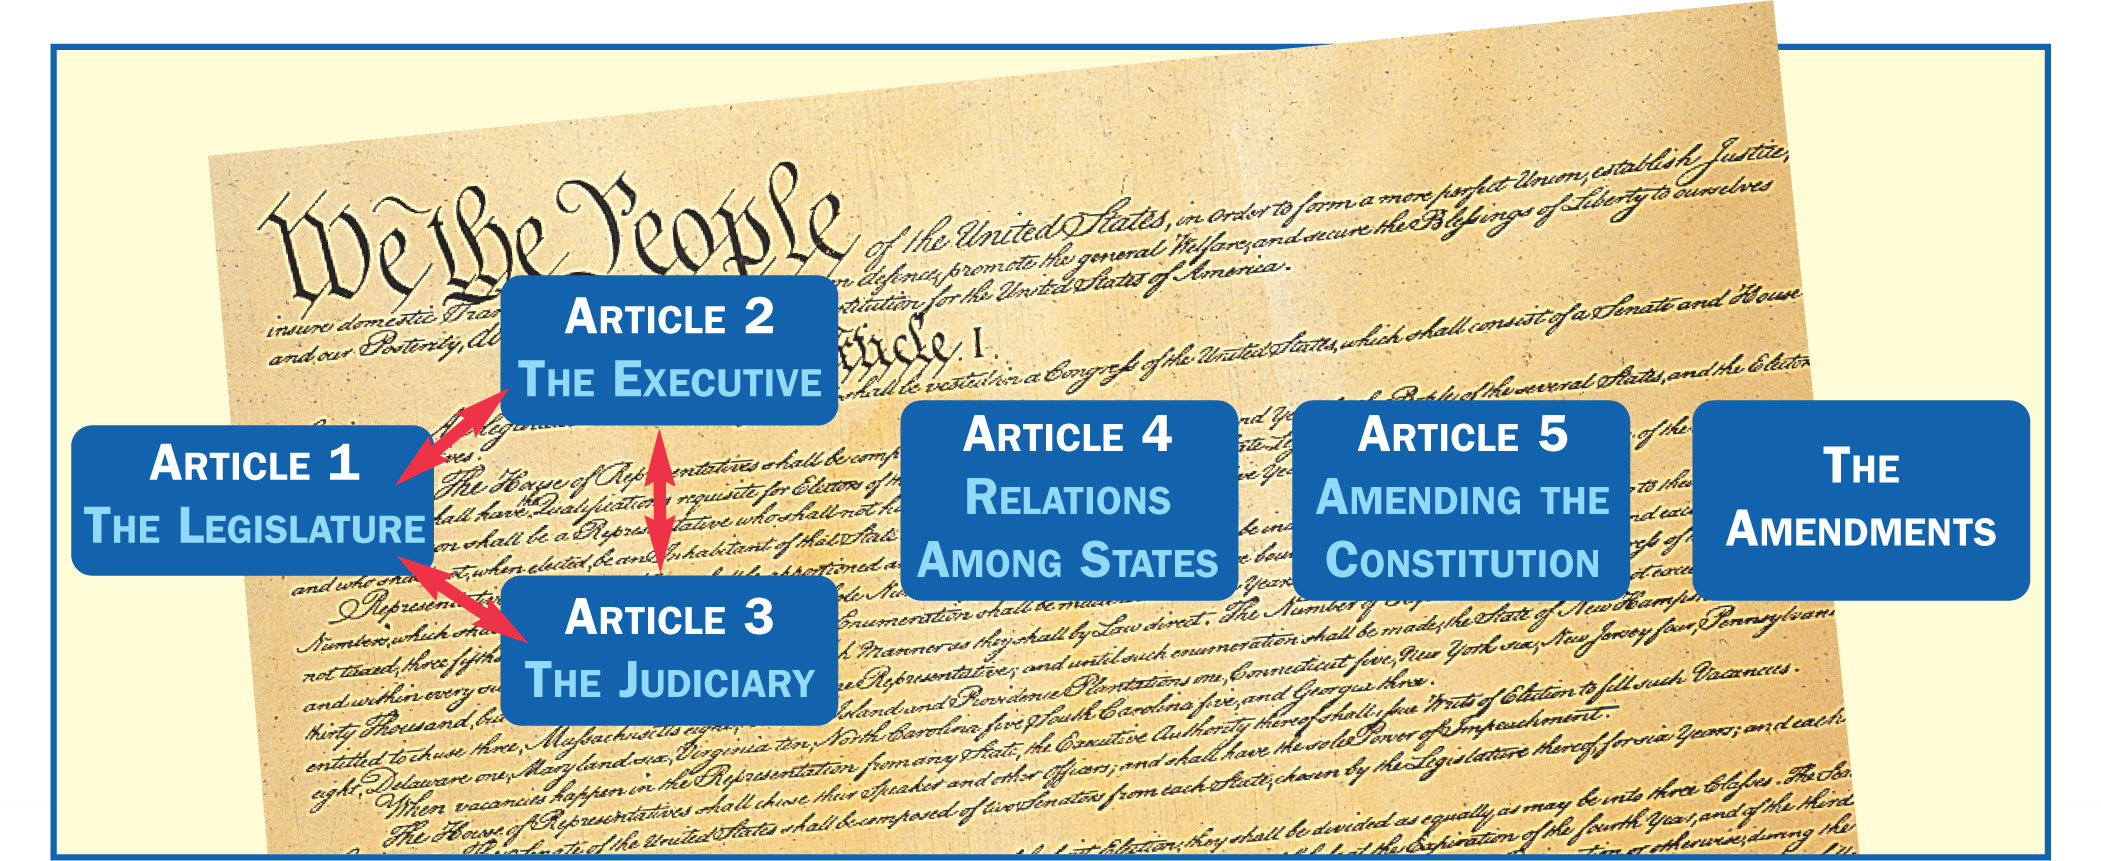 A chart shows the articles
of the Constitution.